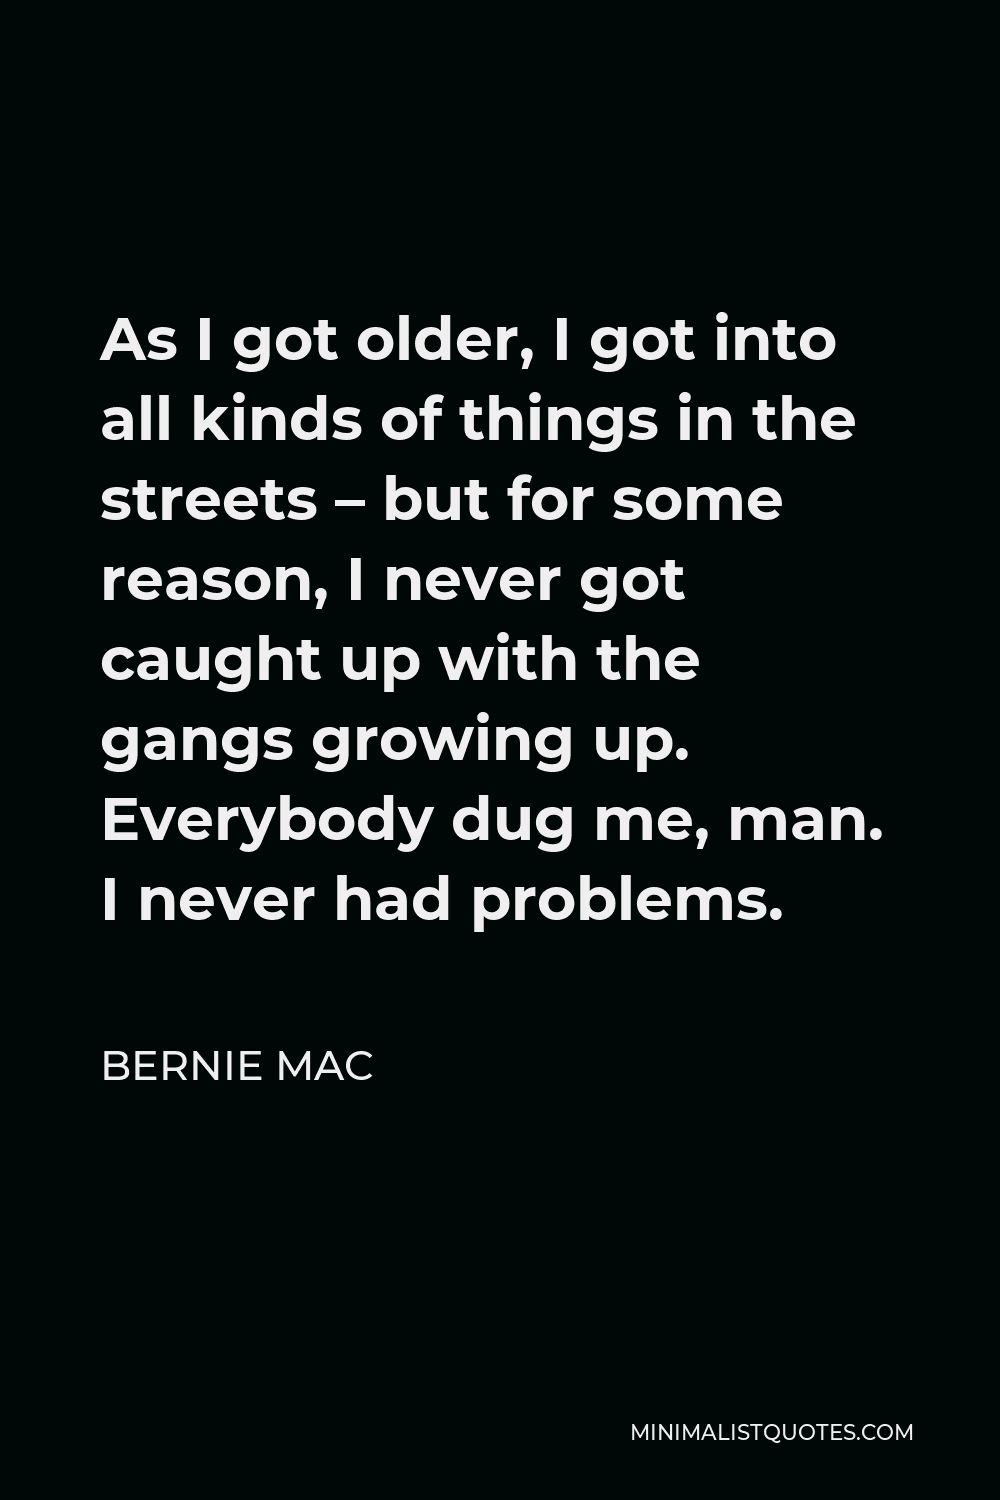 Bernie Mac Quote - As I got older, I got into all kinds of things in the streets – but for some reason, I never got caught up with the gangs growing up. Everybody dug me, man. I never had problems.